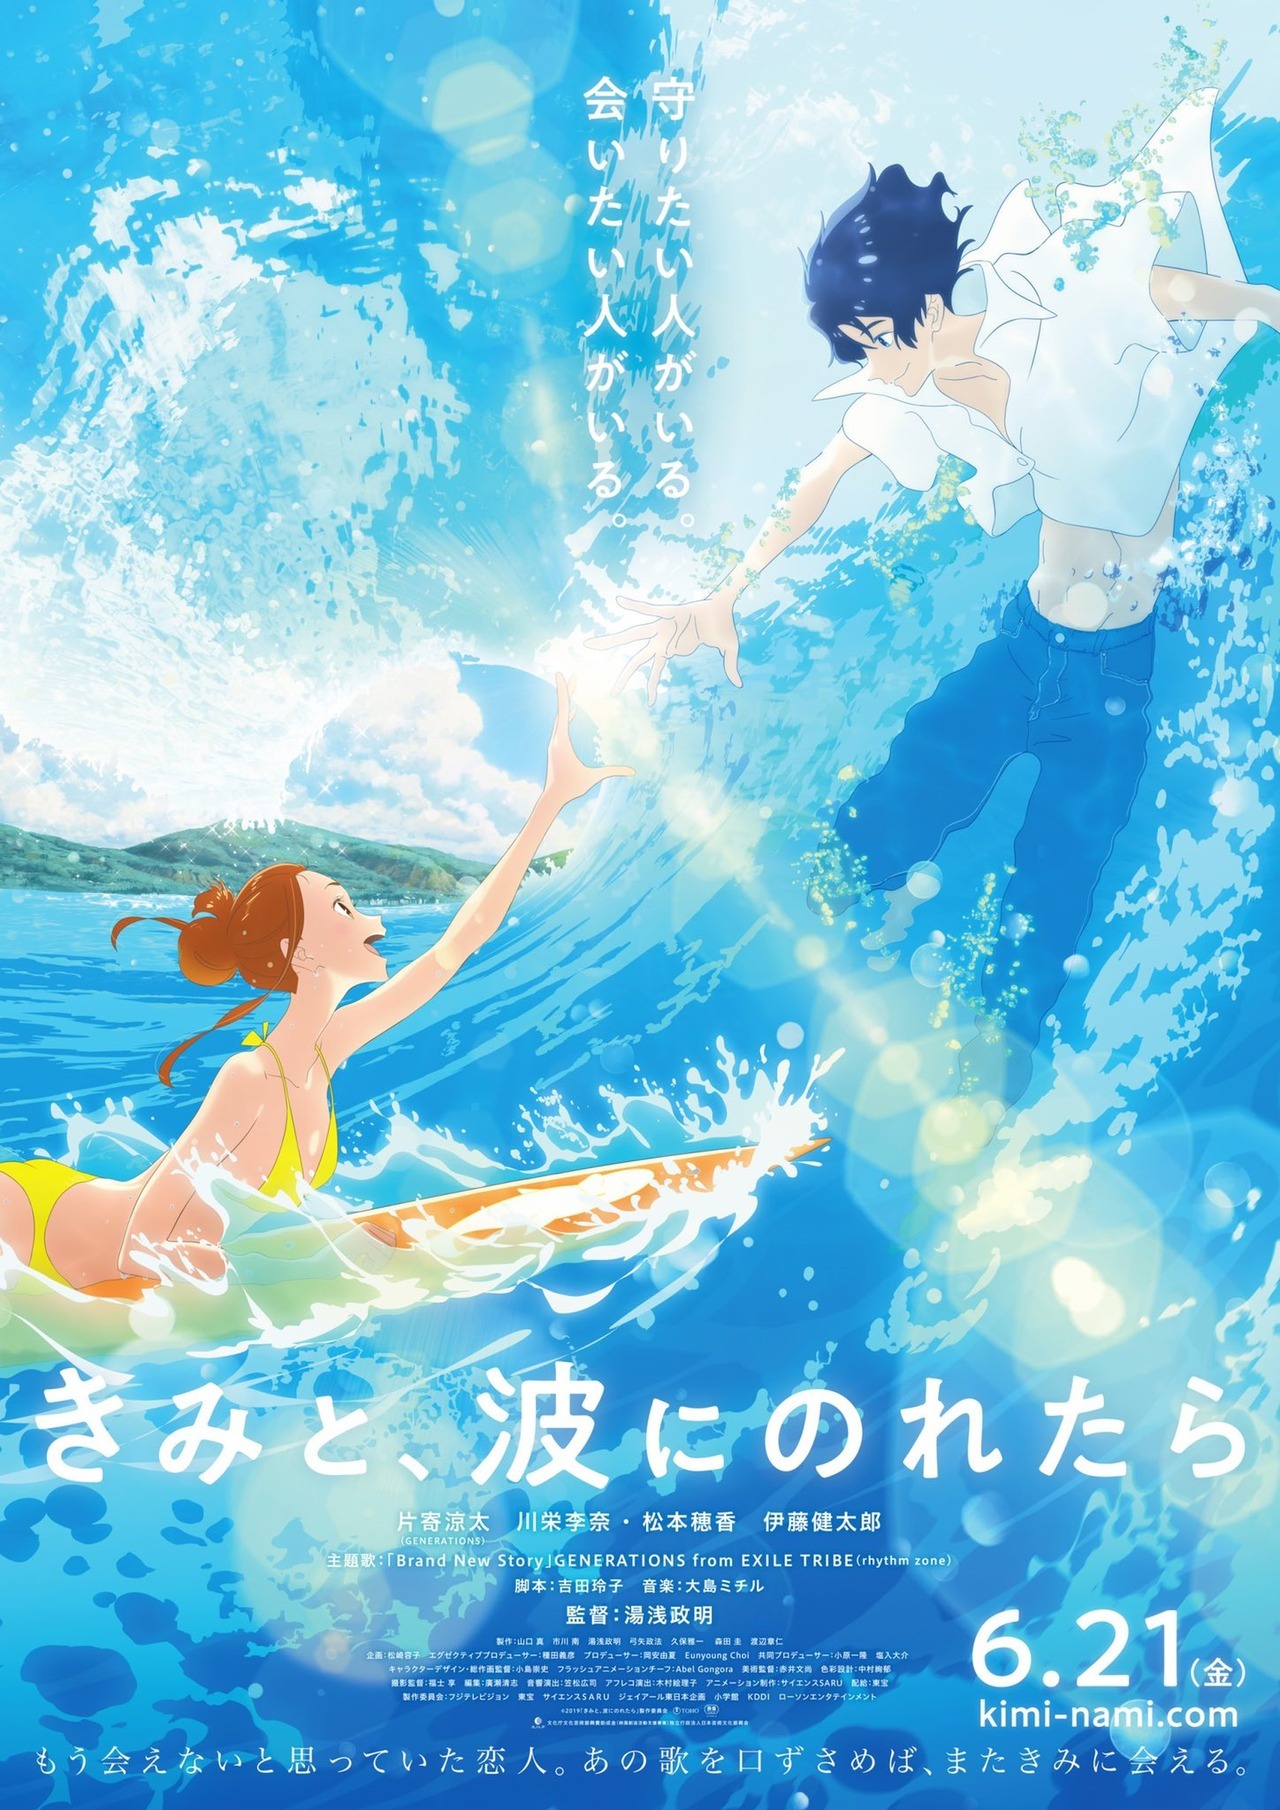 The latest PV and poster visual for the âKimi to, Nami ni Noretaraâ anime film has been published today. Itâll open in Japanese theaters on June 21st. -Synopsis-ââThe story centers on the relationship between Hinako, who has moved to a coastal town...